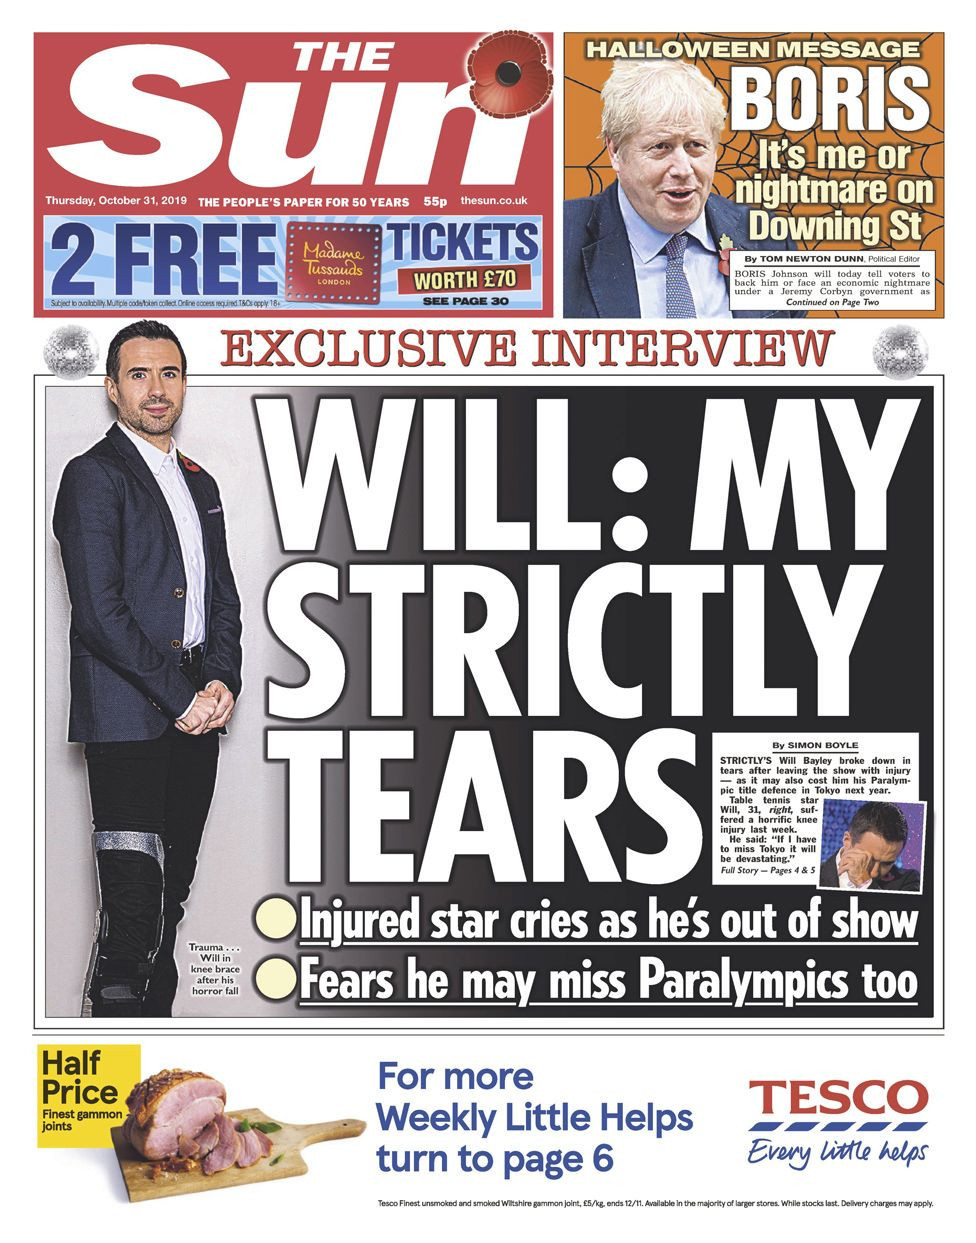 Will Bayley's withdrawal from Strictly Come Dancing was front page news on Britain's biggest selling newspaper ©The Sun